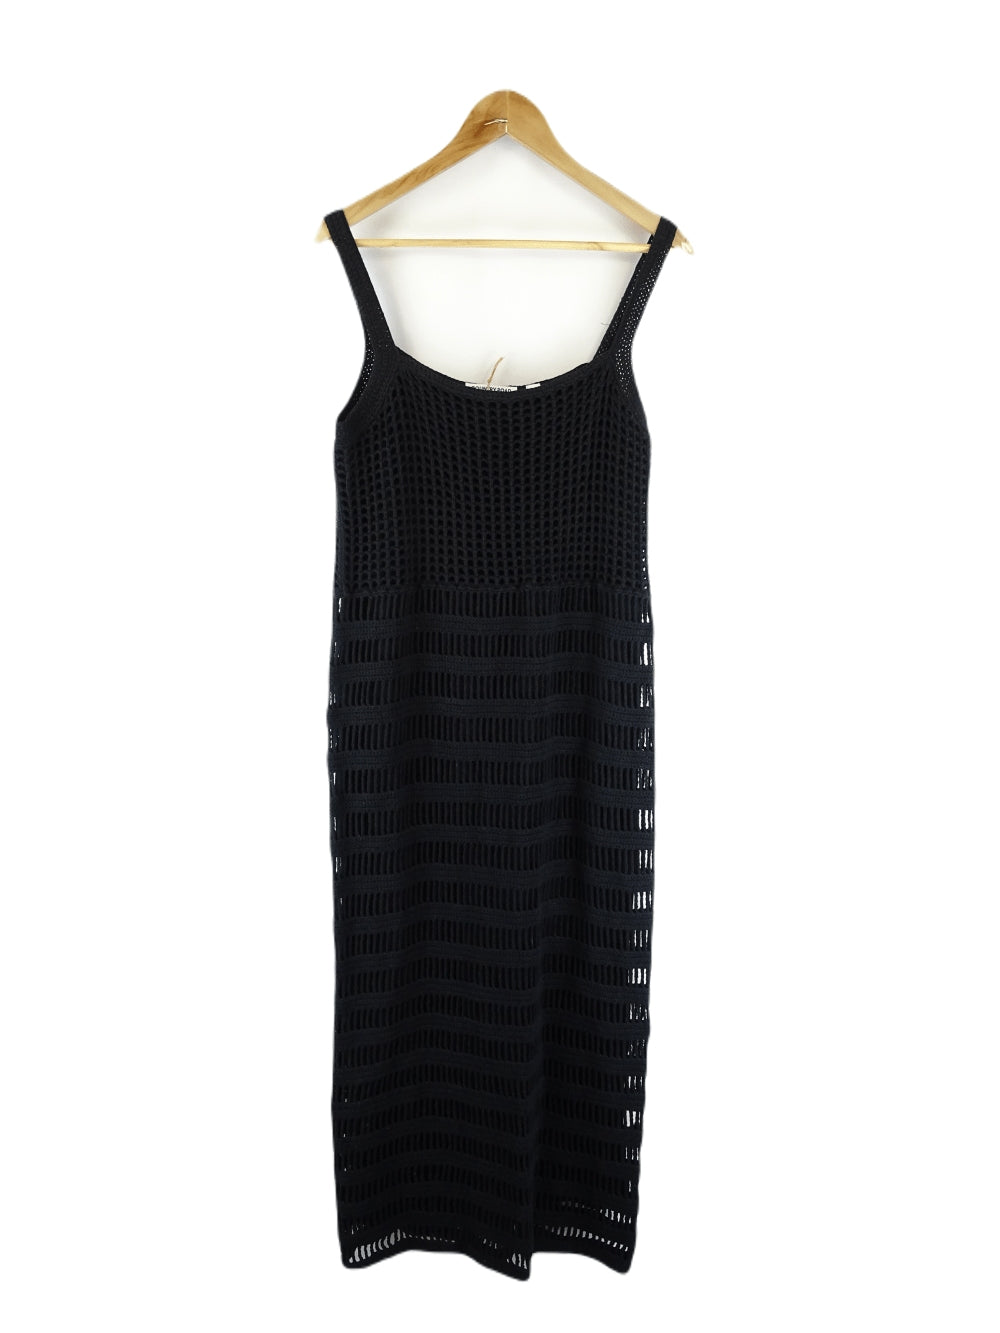 Country Road Black Knit Dress M